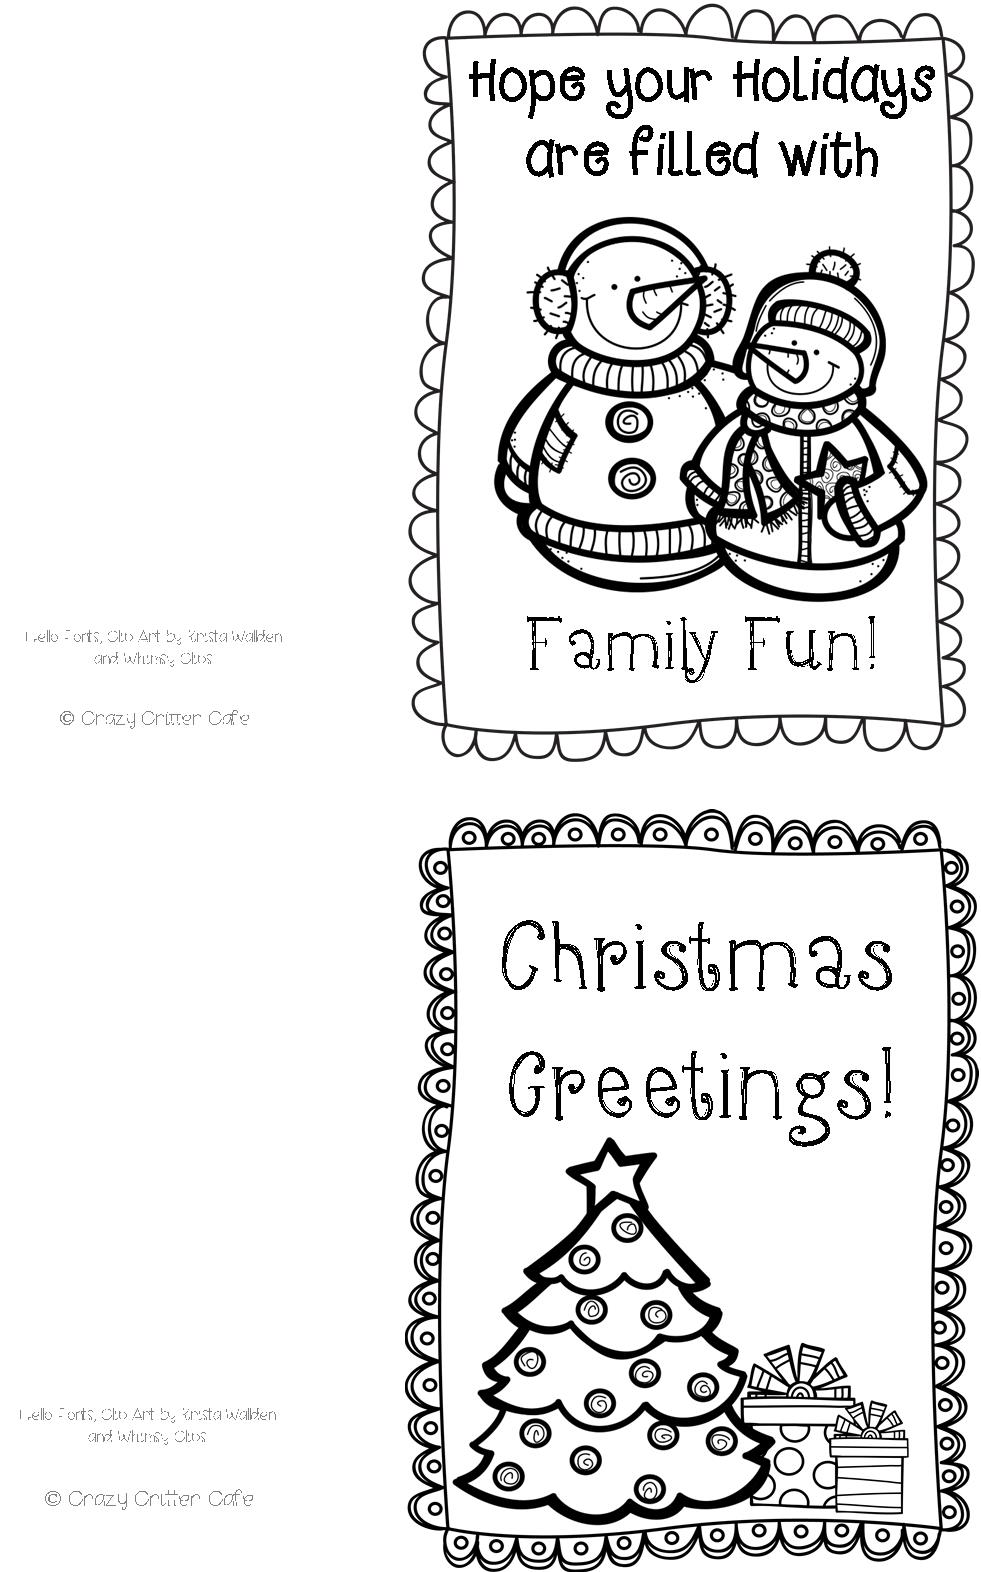 Crazy Critter Cafe Freebie 3 Color Your Own Christmas Cards